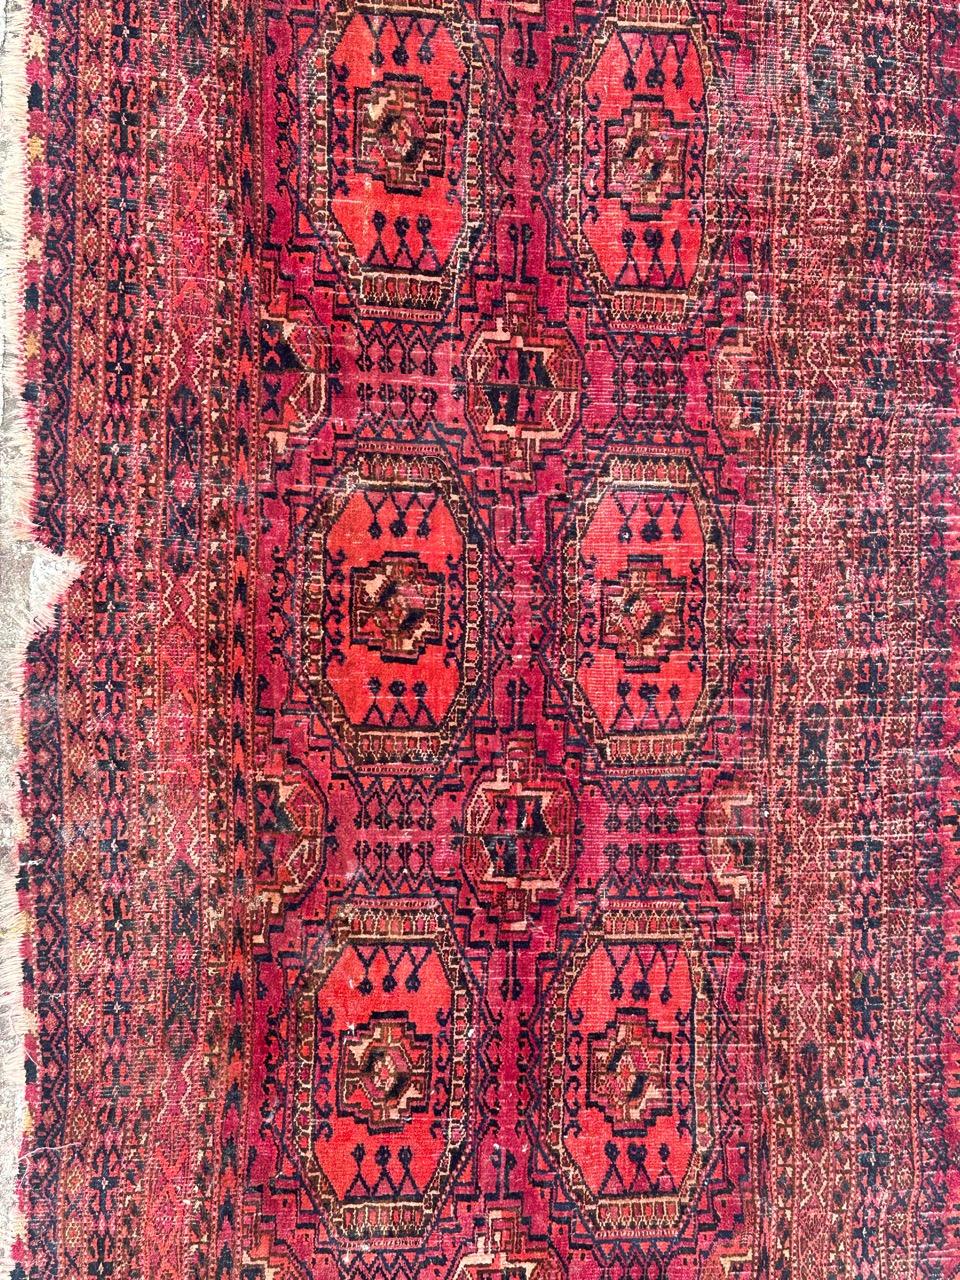 Late 19th century Turkmen Yomut Afghan Chuval rug, originally for horse cover, with a Beautiful Turkmen tribal design and nice natural colors with pink, brown, red , orange and blue, entirely and finely hand knotted with wool velvet on wool